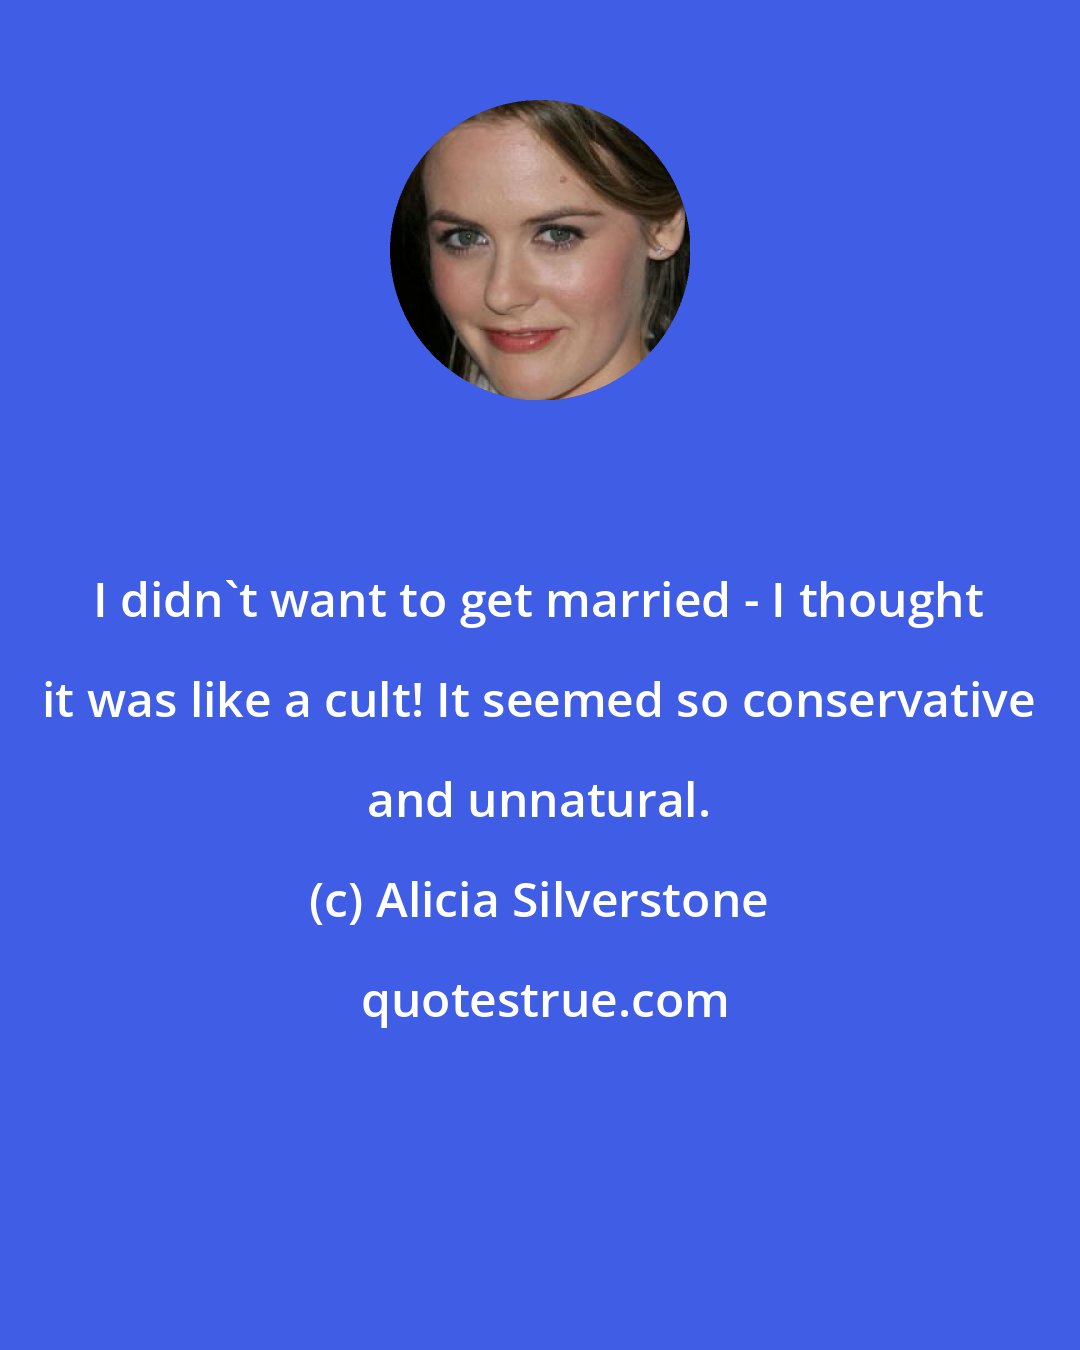 Alicia Silverstone: I didn't want to get married - I thought it was like a cult! It seemed so conservative and unnatural.